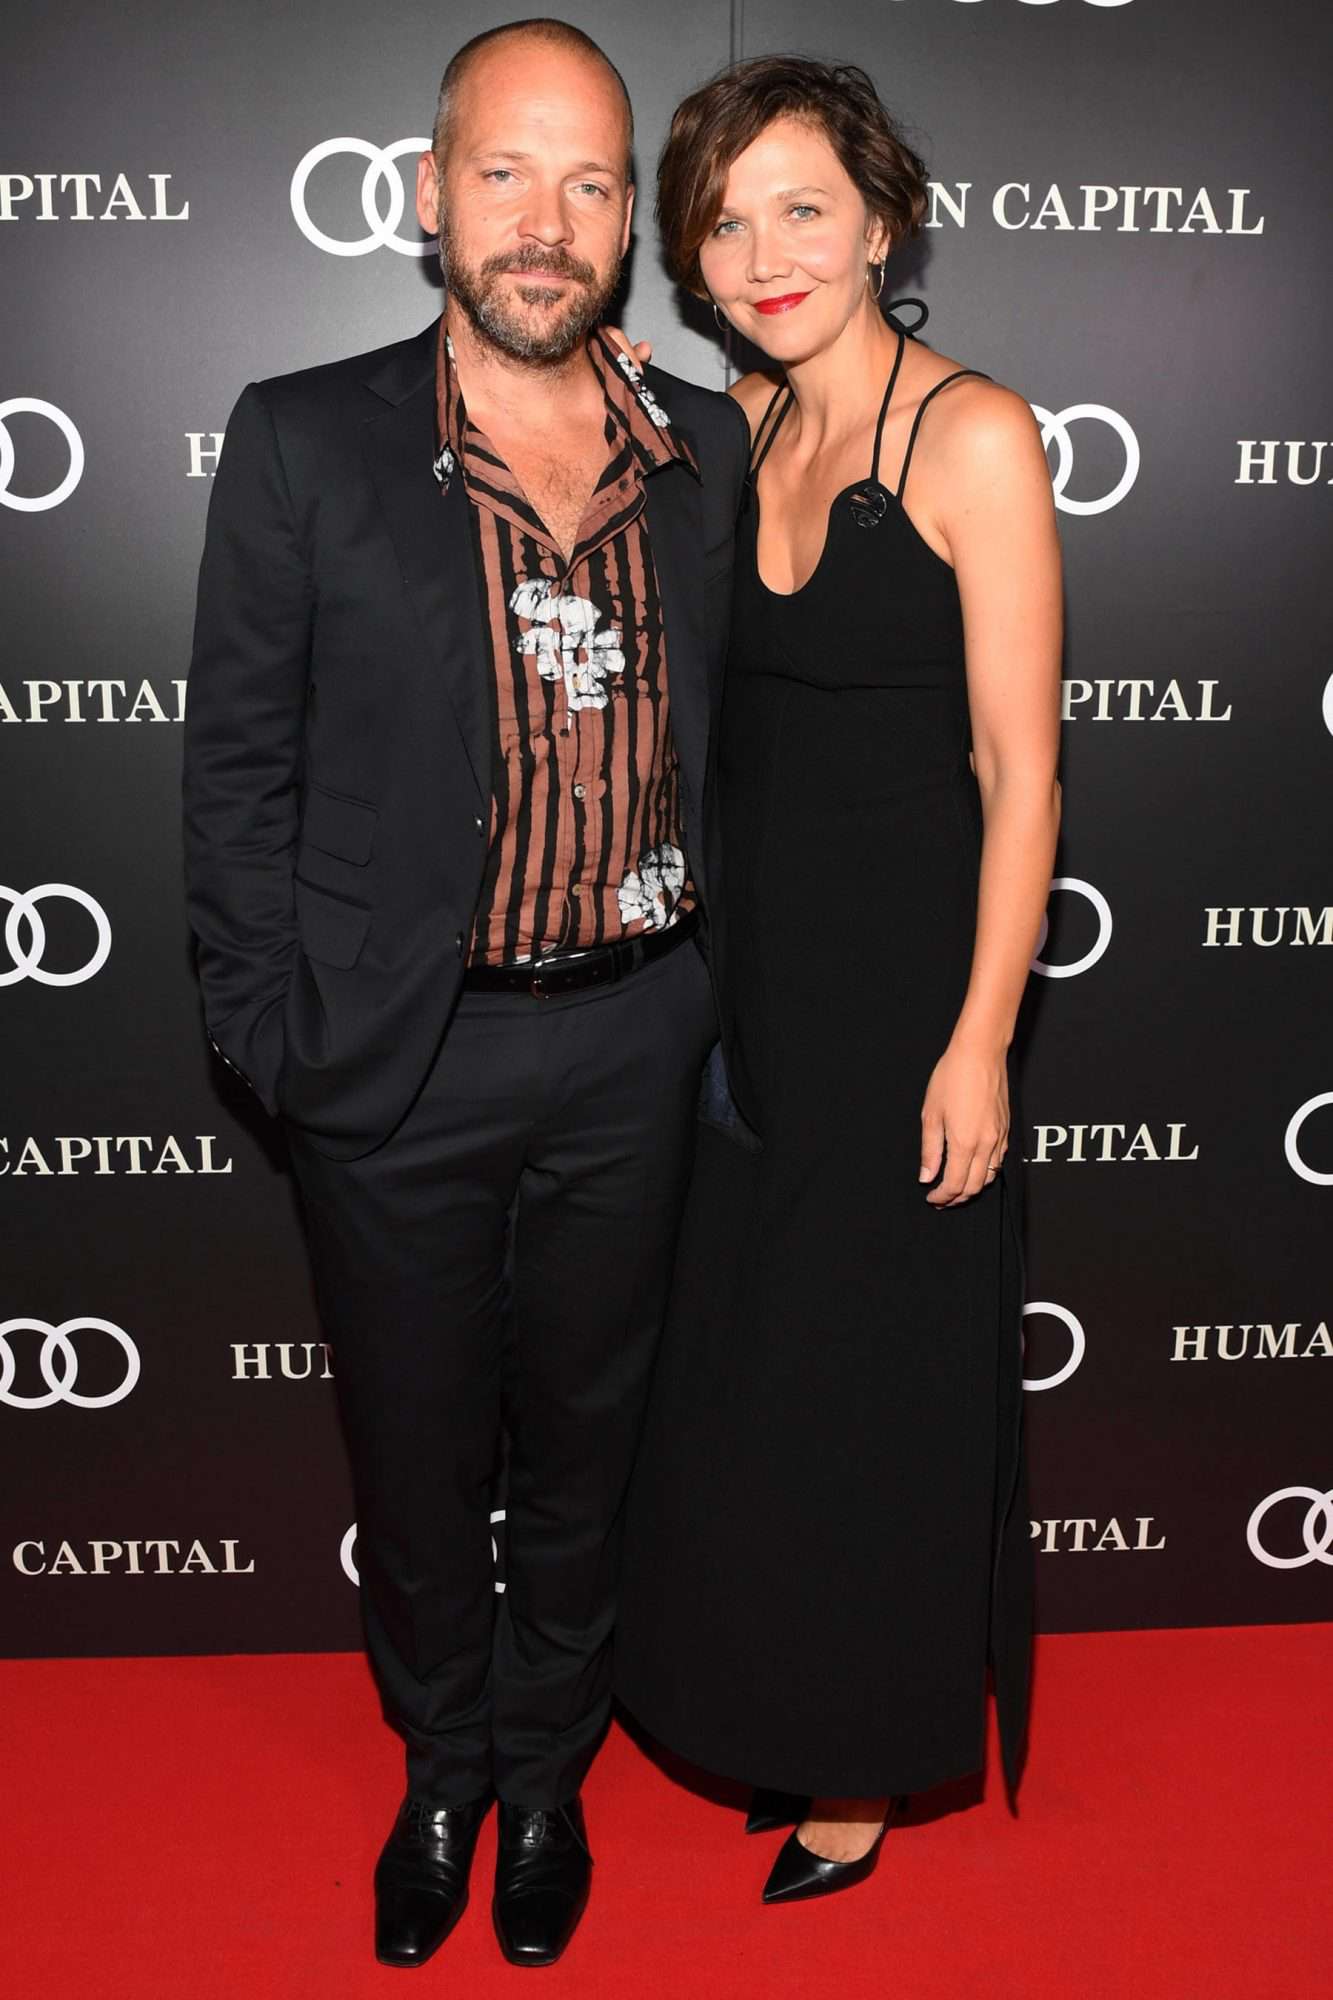 Audi Canada Hosts The Post-Screening Event For "Human Capital" During The Toronto International Film Festival